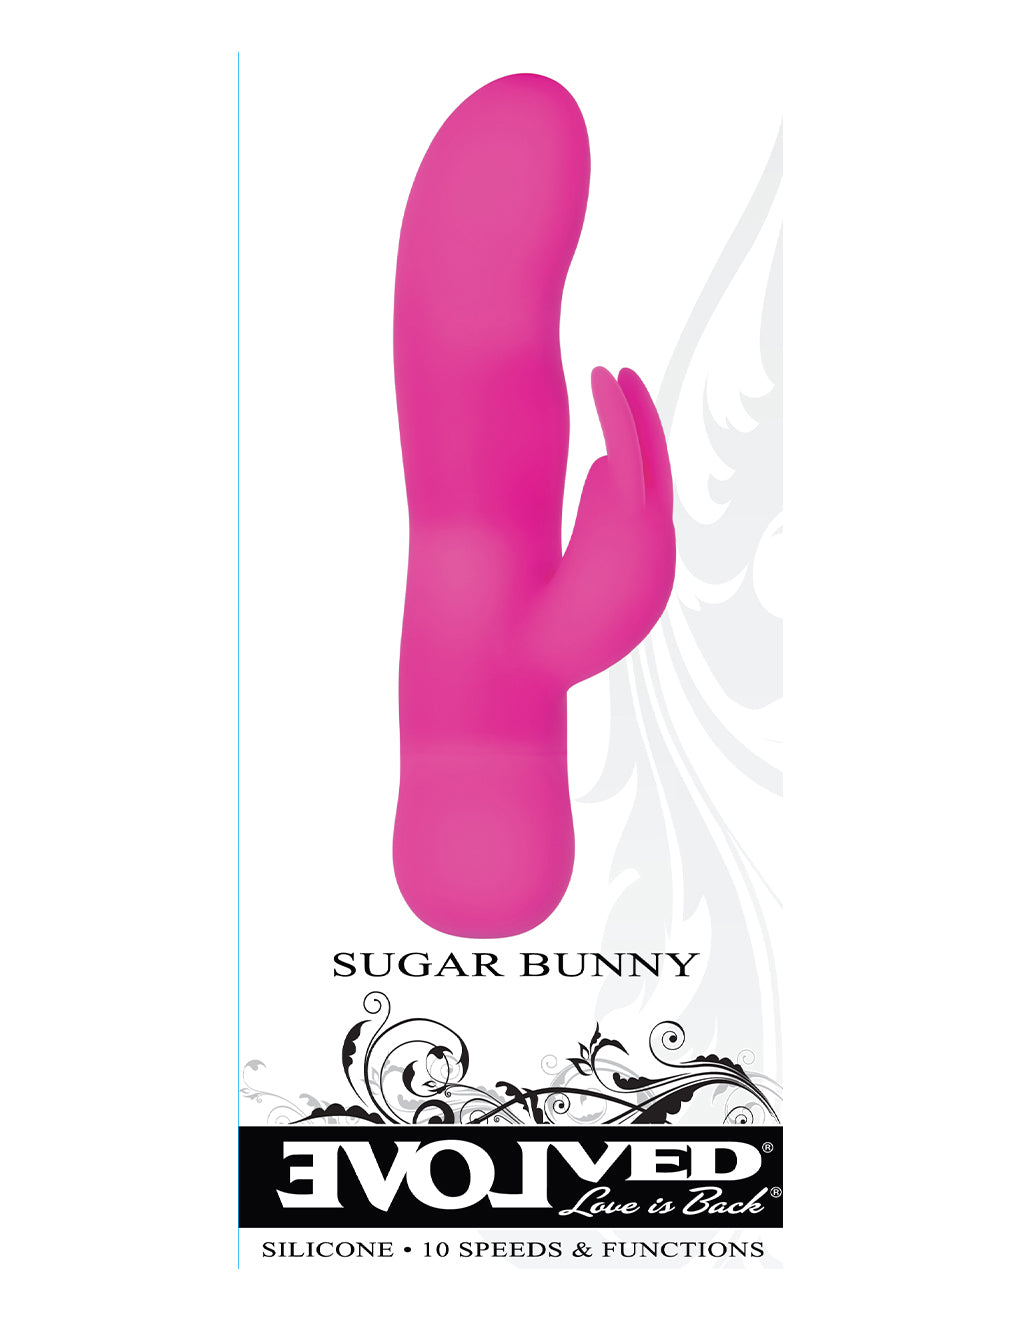 Evolved Sugar Bunny- Package